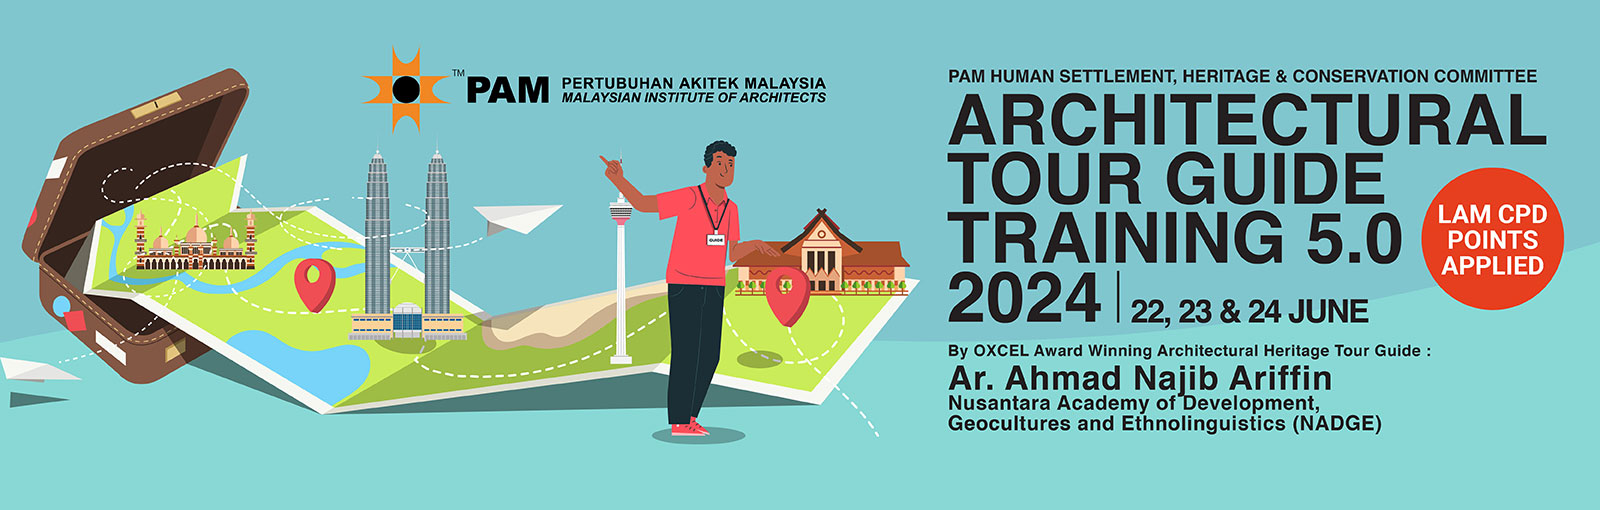 Architectural Tour Guide Training 5.0 2024